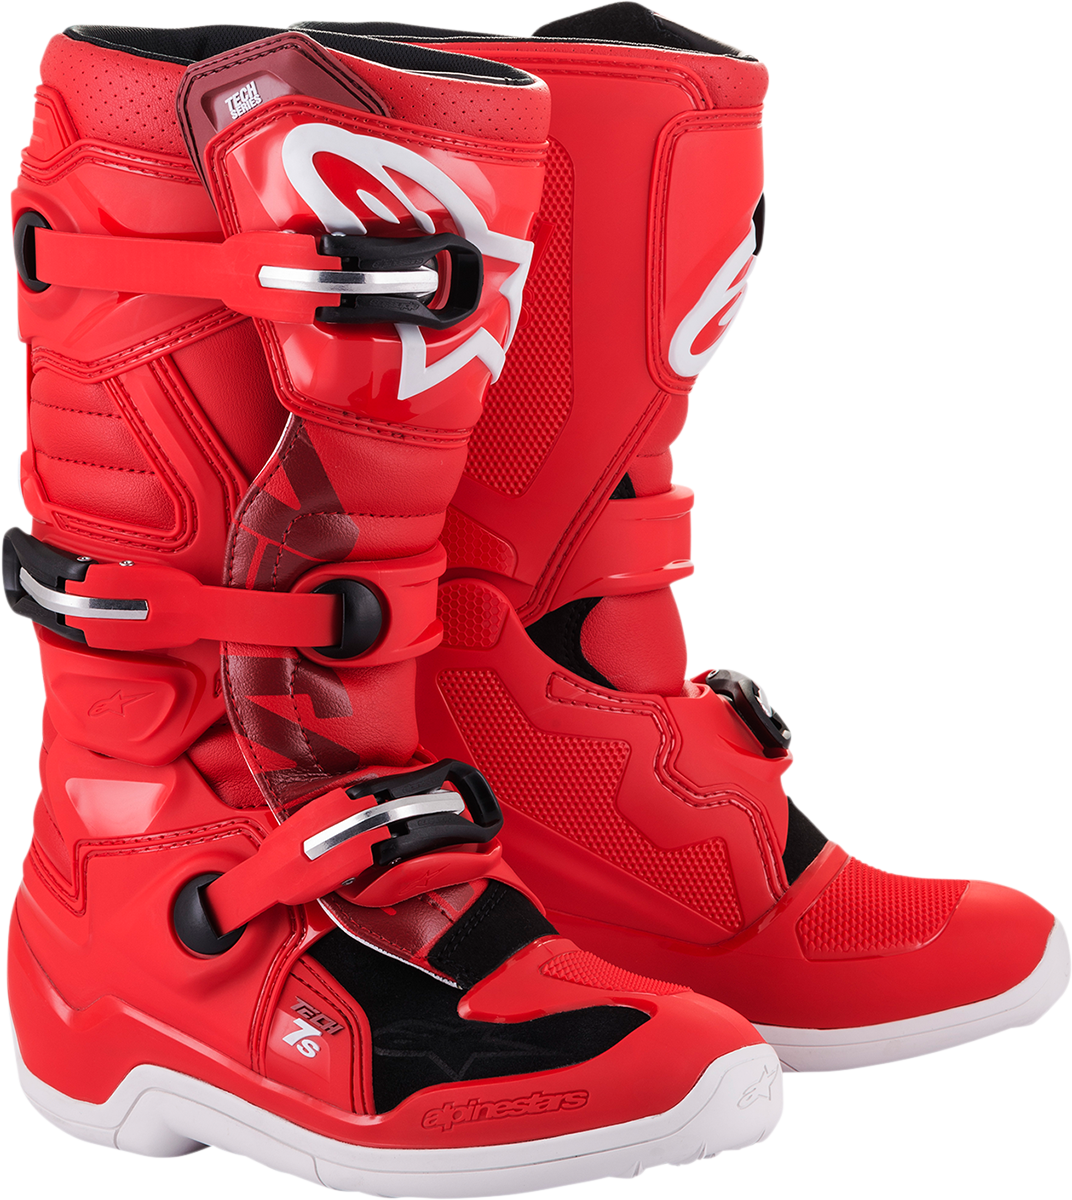 ALPINESTARS Youth Tech 7S Boots - Red - US 5 2015017-30-5